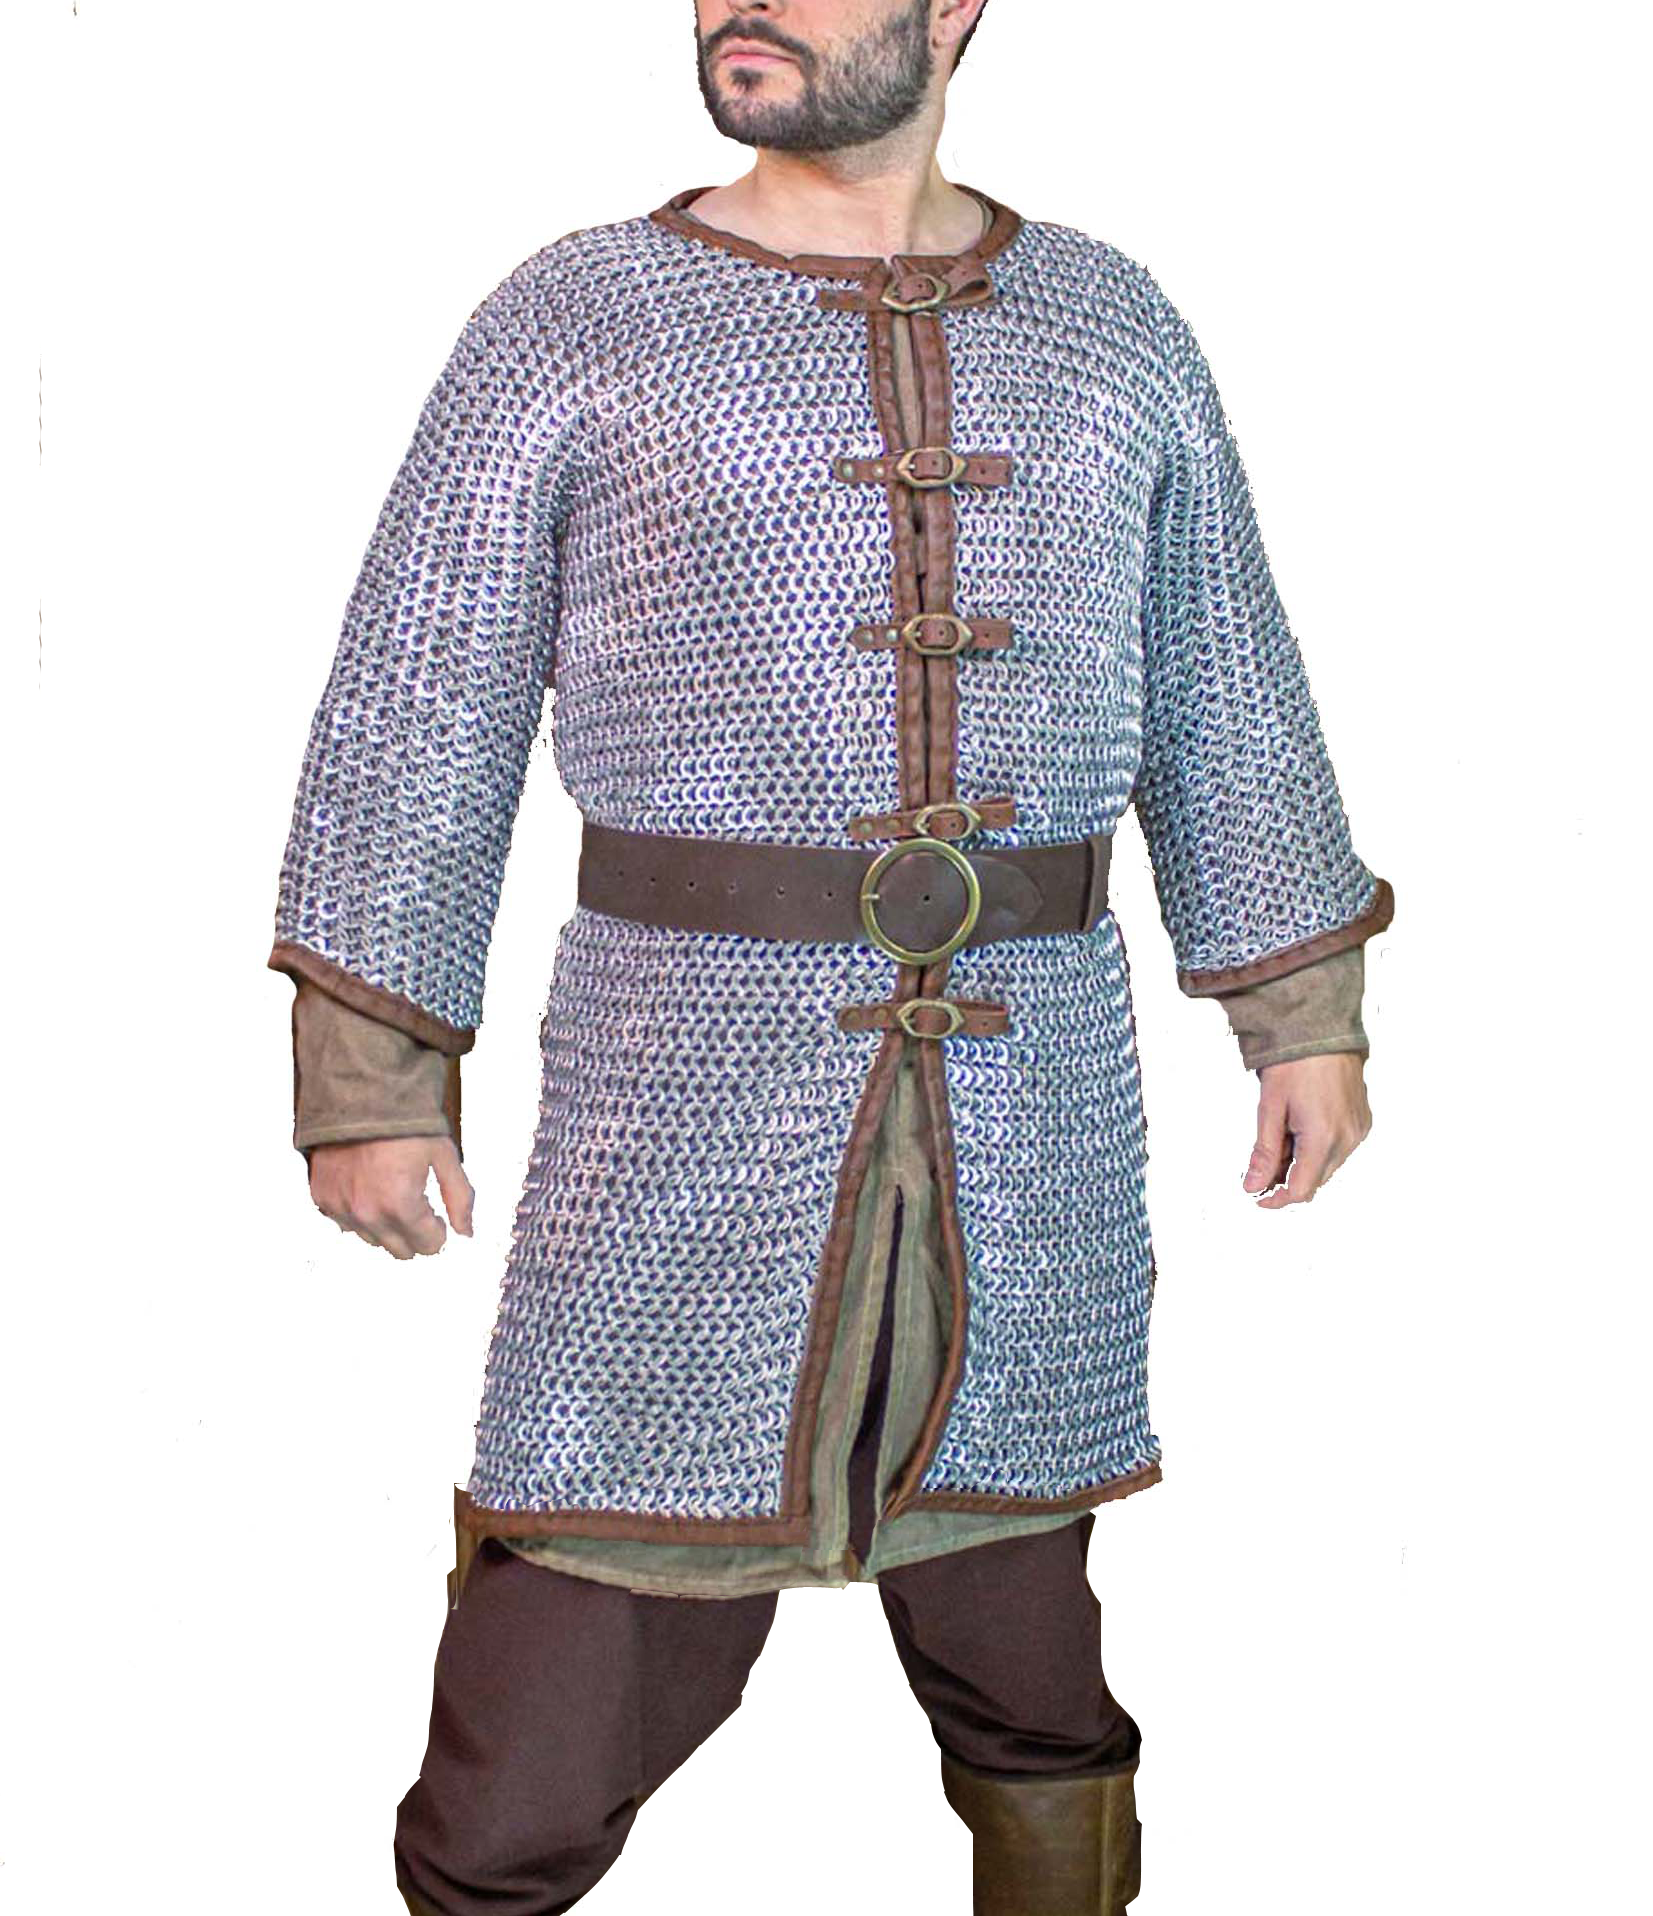 Medievals Fancy Dress ALuminum flat riveted front open chainmail